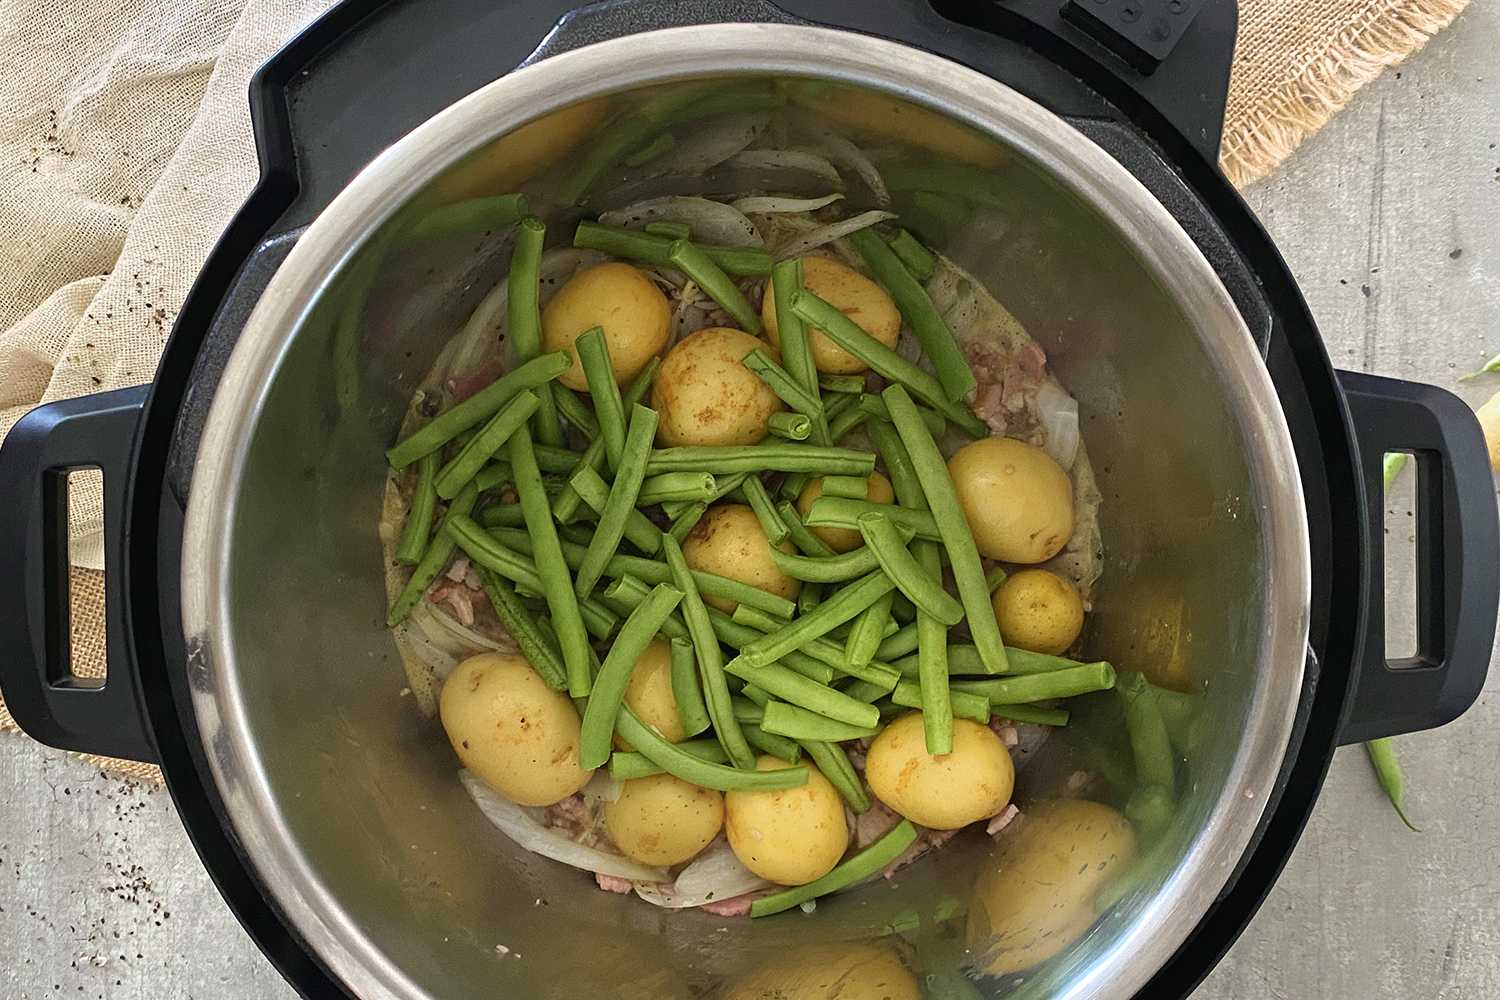 How Long To Cook Green Beans In An Electric Pressure Cooker